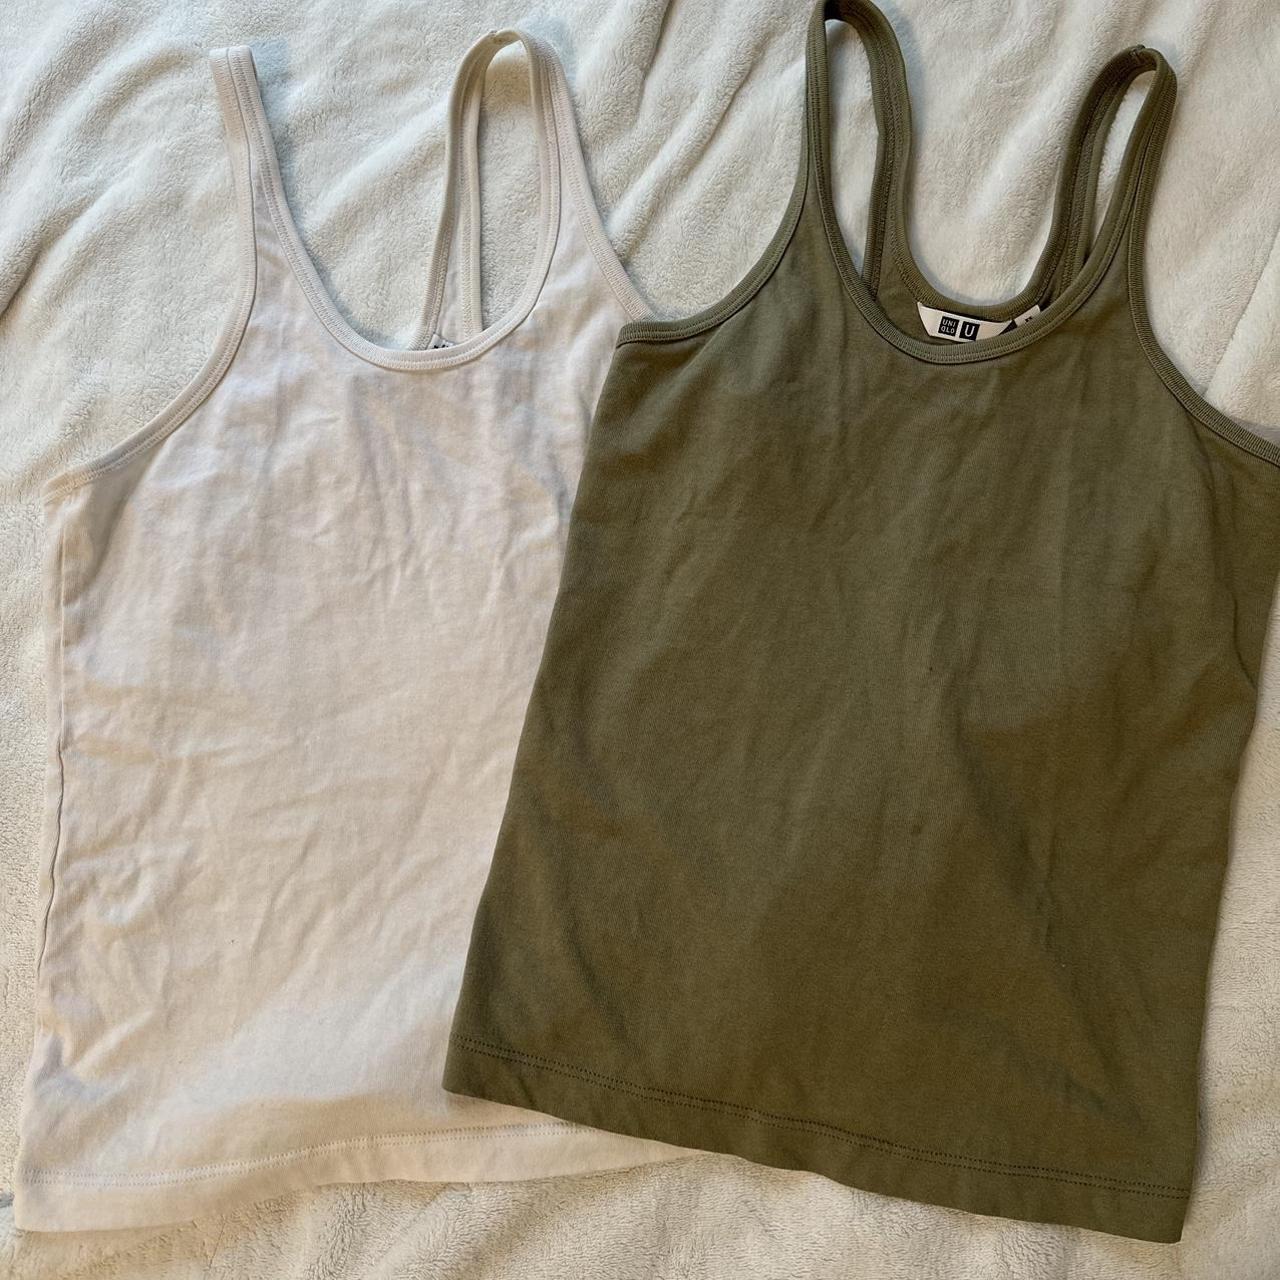 UNIQLO Olive Green and White Tank Top - basic... - Depop